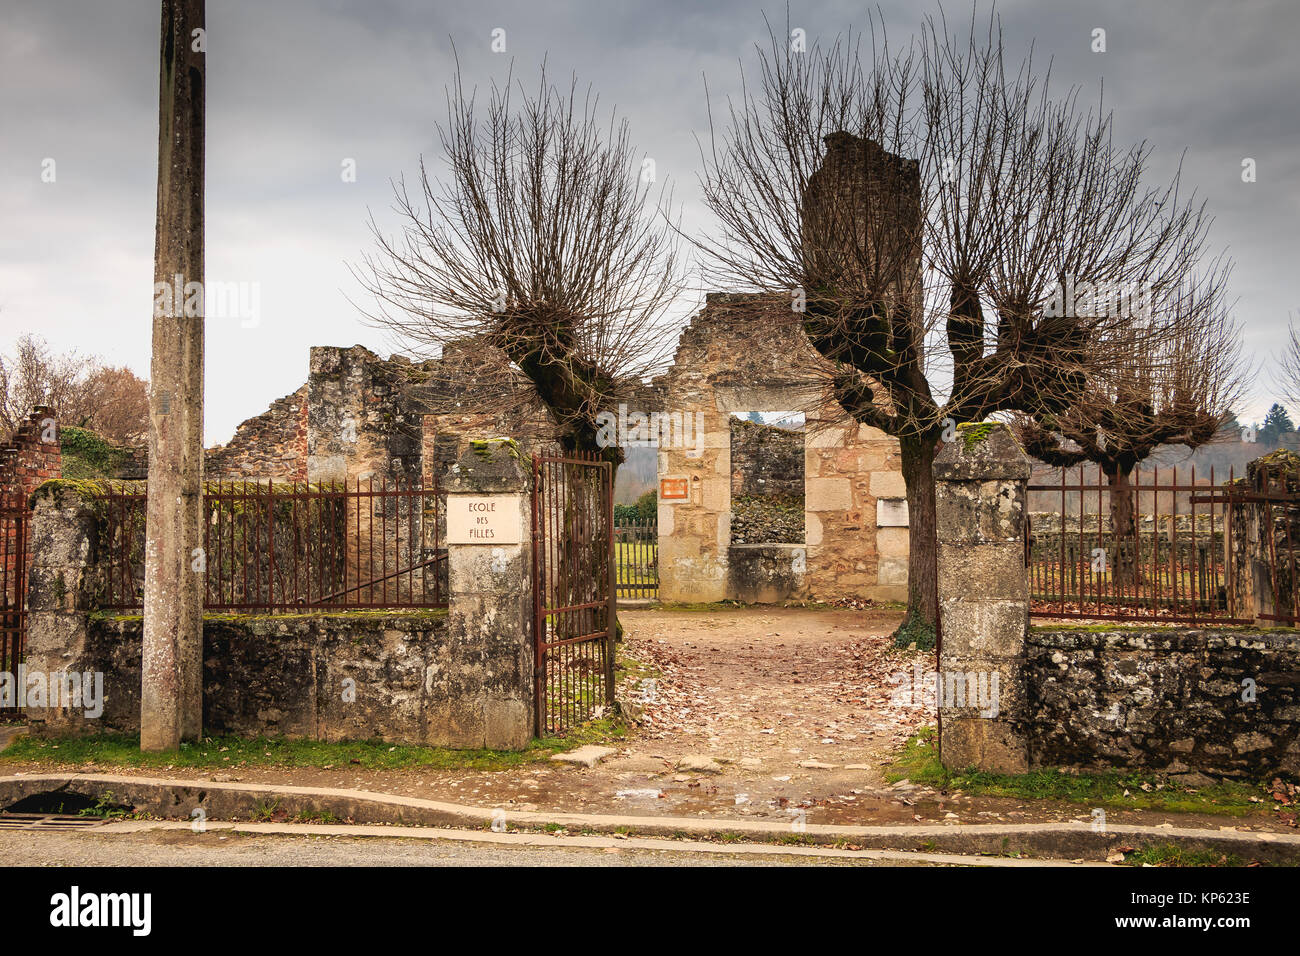 ORADOUR SUR GLANE, FRANCE - December 03, 2017 : Remains of girls' school, destroyed by fire after Nazi massacre of the population on June 10, 1944 Stock Photo